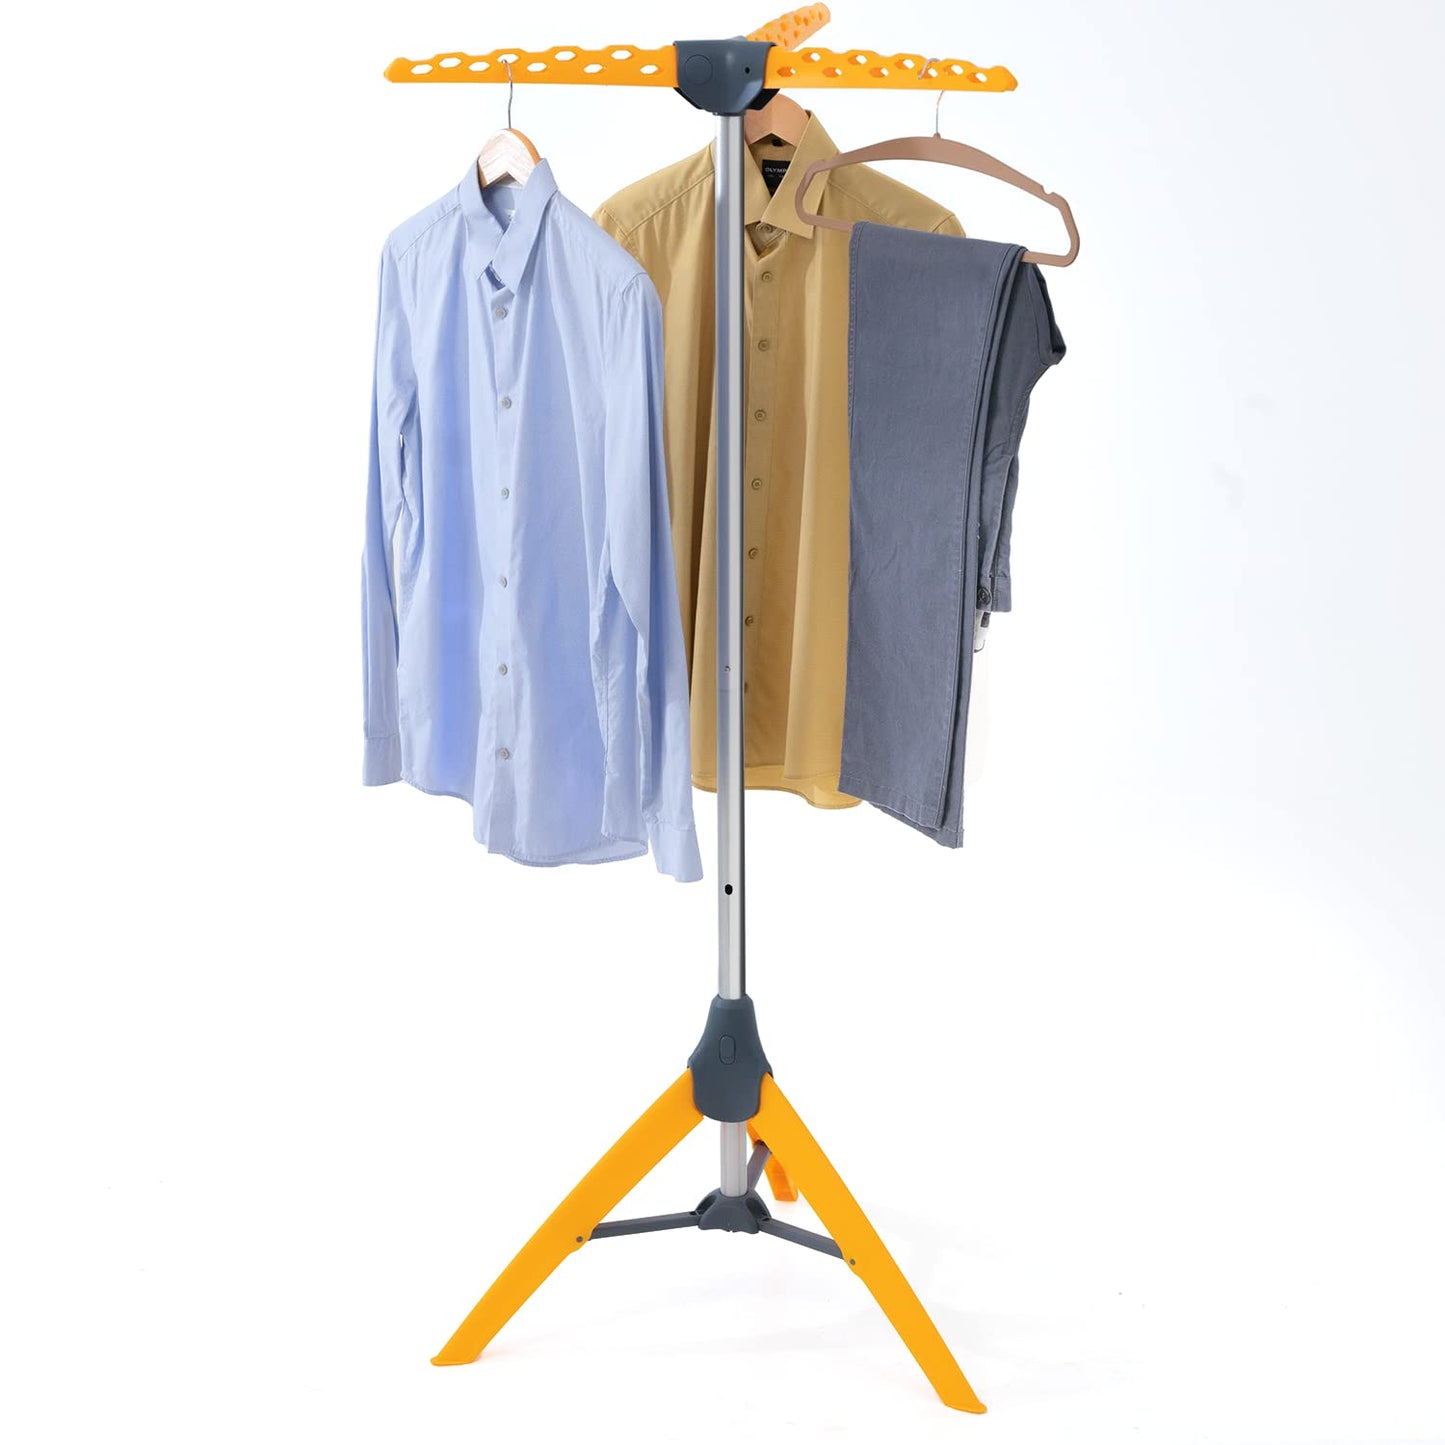 Sturdy Foldable Clothes Airer, Clothes Hangers Stand, Foldable Clothes Rack, Tripod Air Dryer, Tatkraft Palm, 1